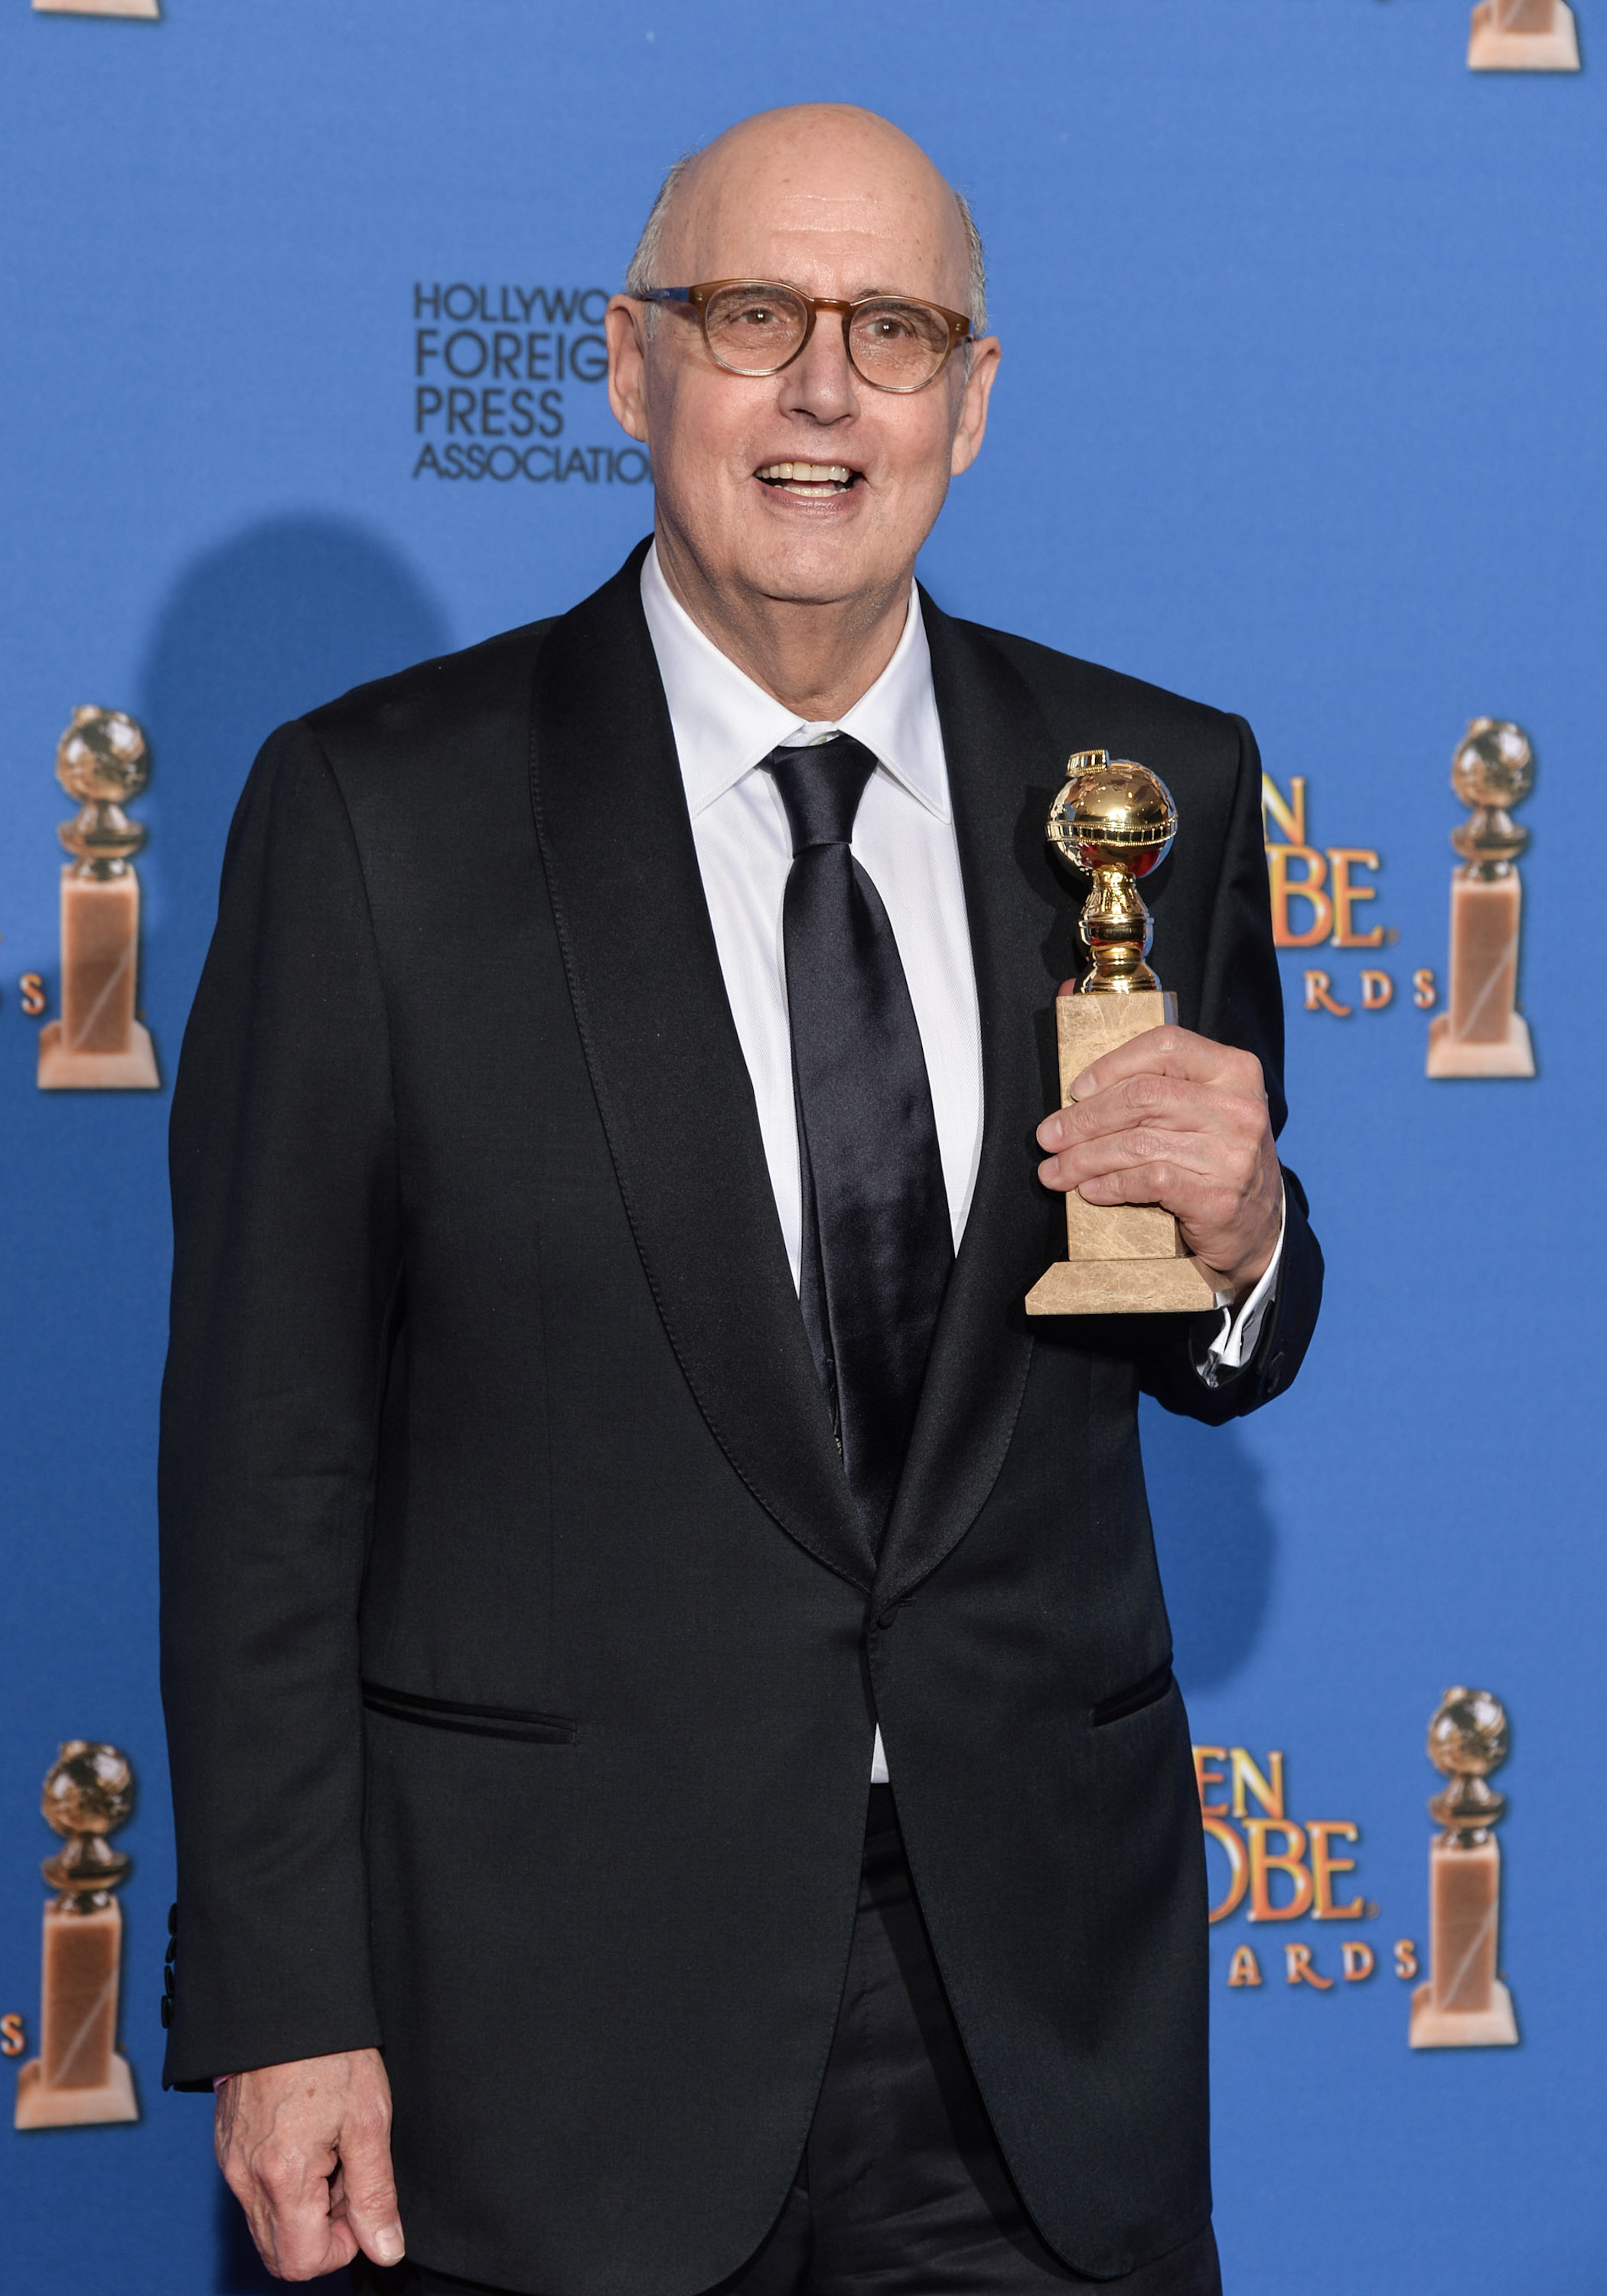 Actor Jeffrey Tambor poses in the press room during the 72nd Annual Golden Globe Awards at The Beverly Hilton Hotel on January 11, 2015 in Beverly Hills, California. (George Pimentel&mdash;WireImage)